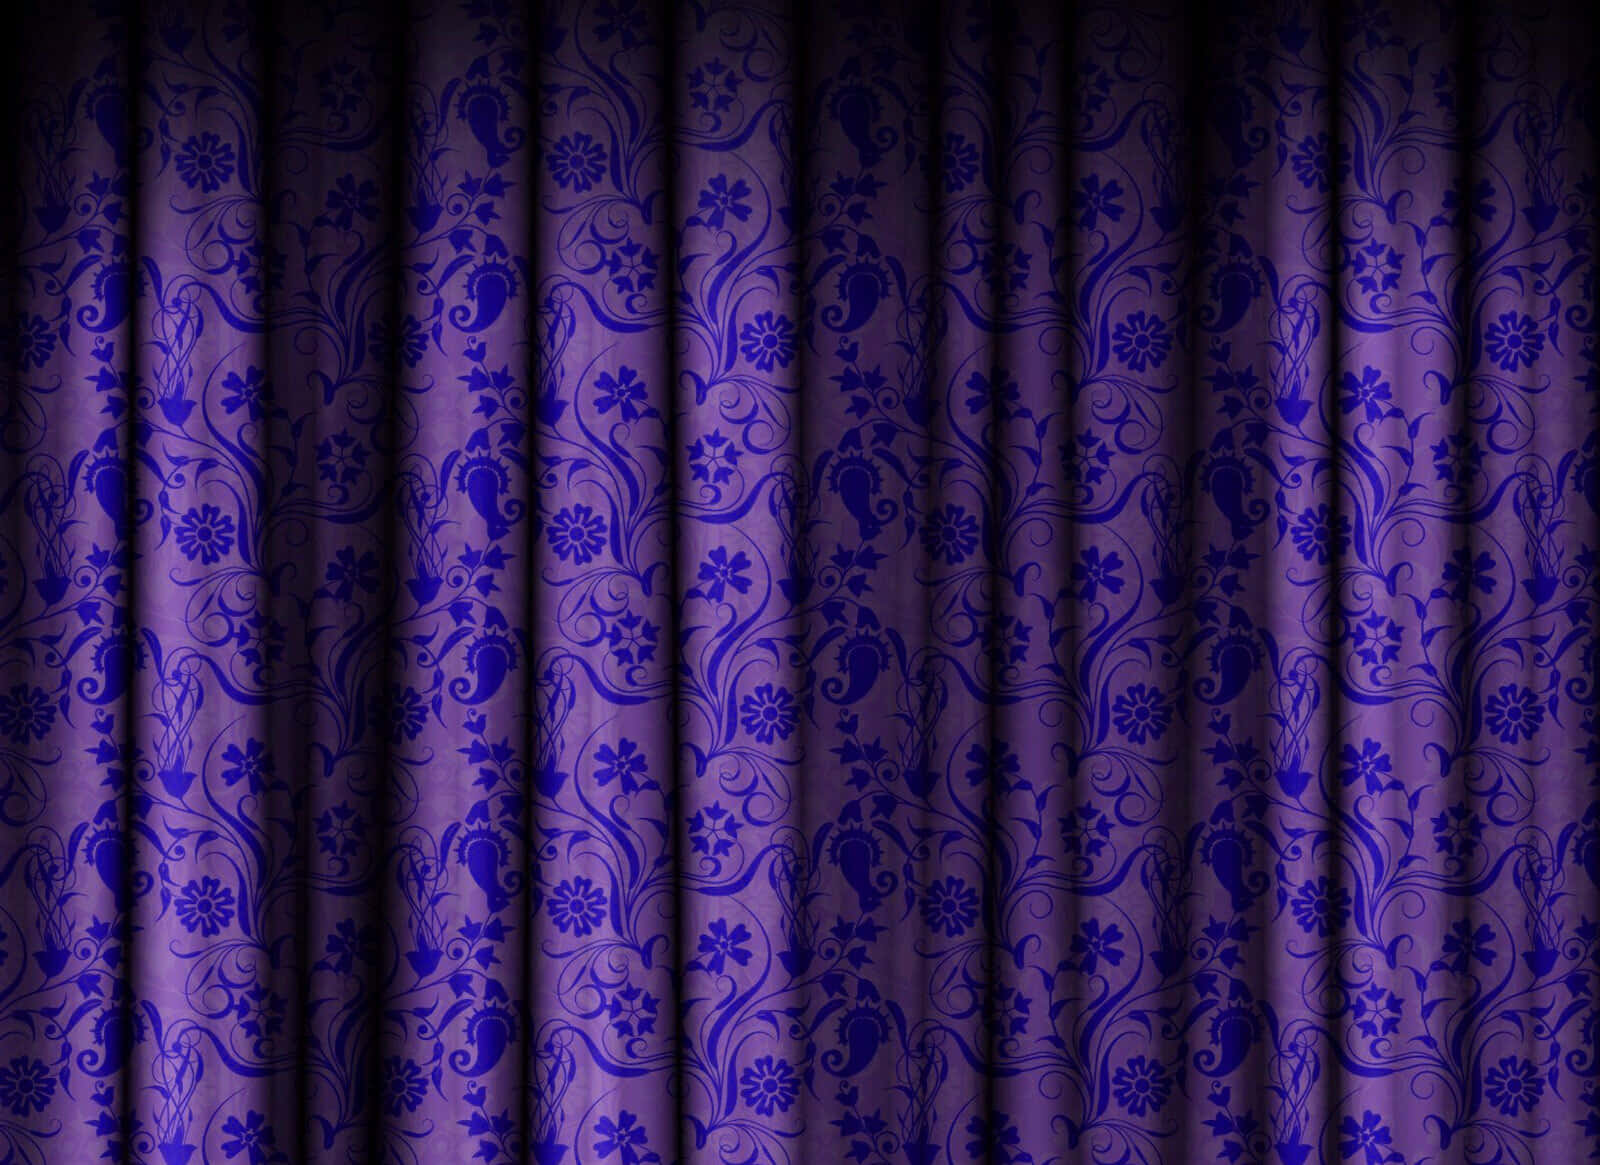 Step out of your comfort zone with a bold, daring set of purple curtains Wallpaper